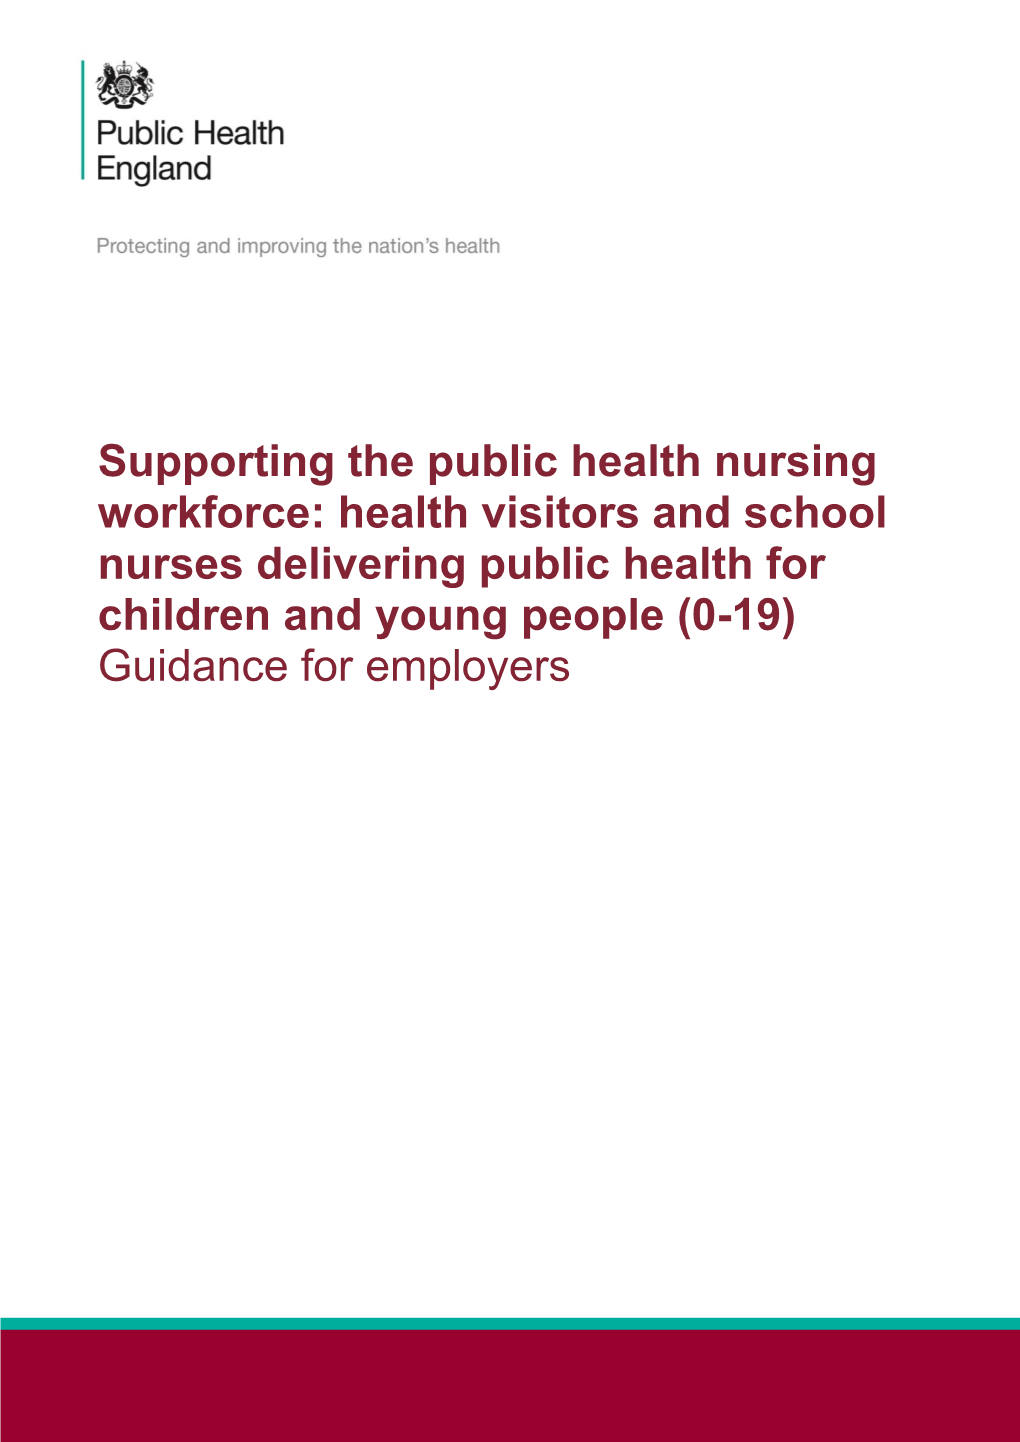 Supporting the Public Health Nursing Workforce